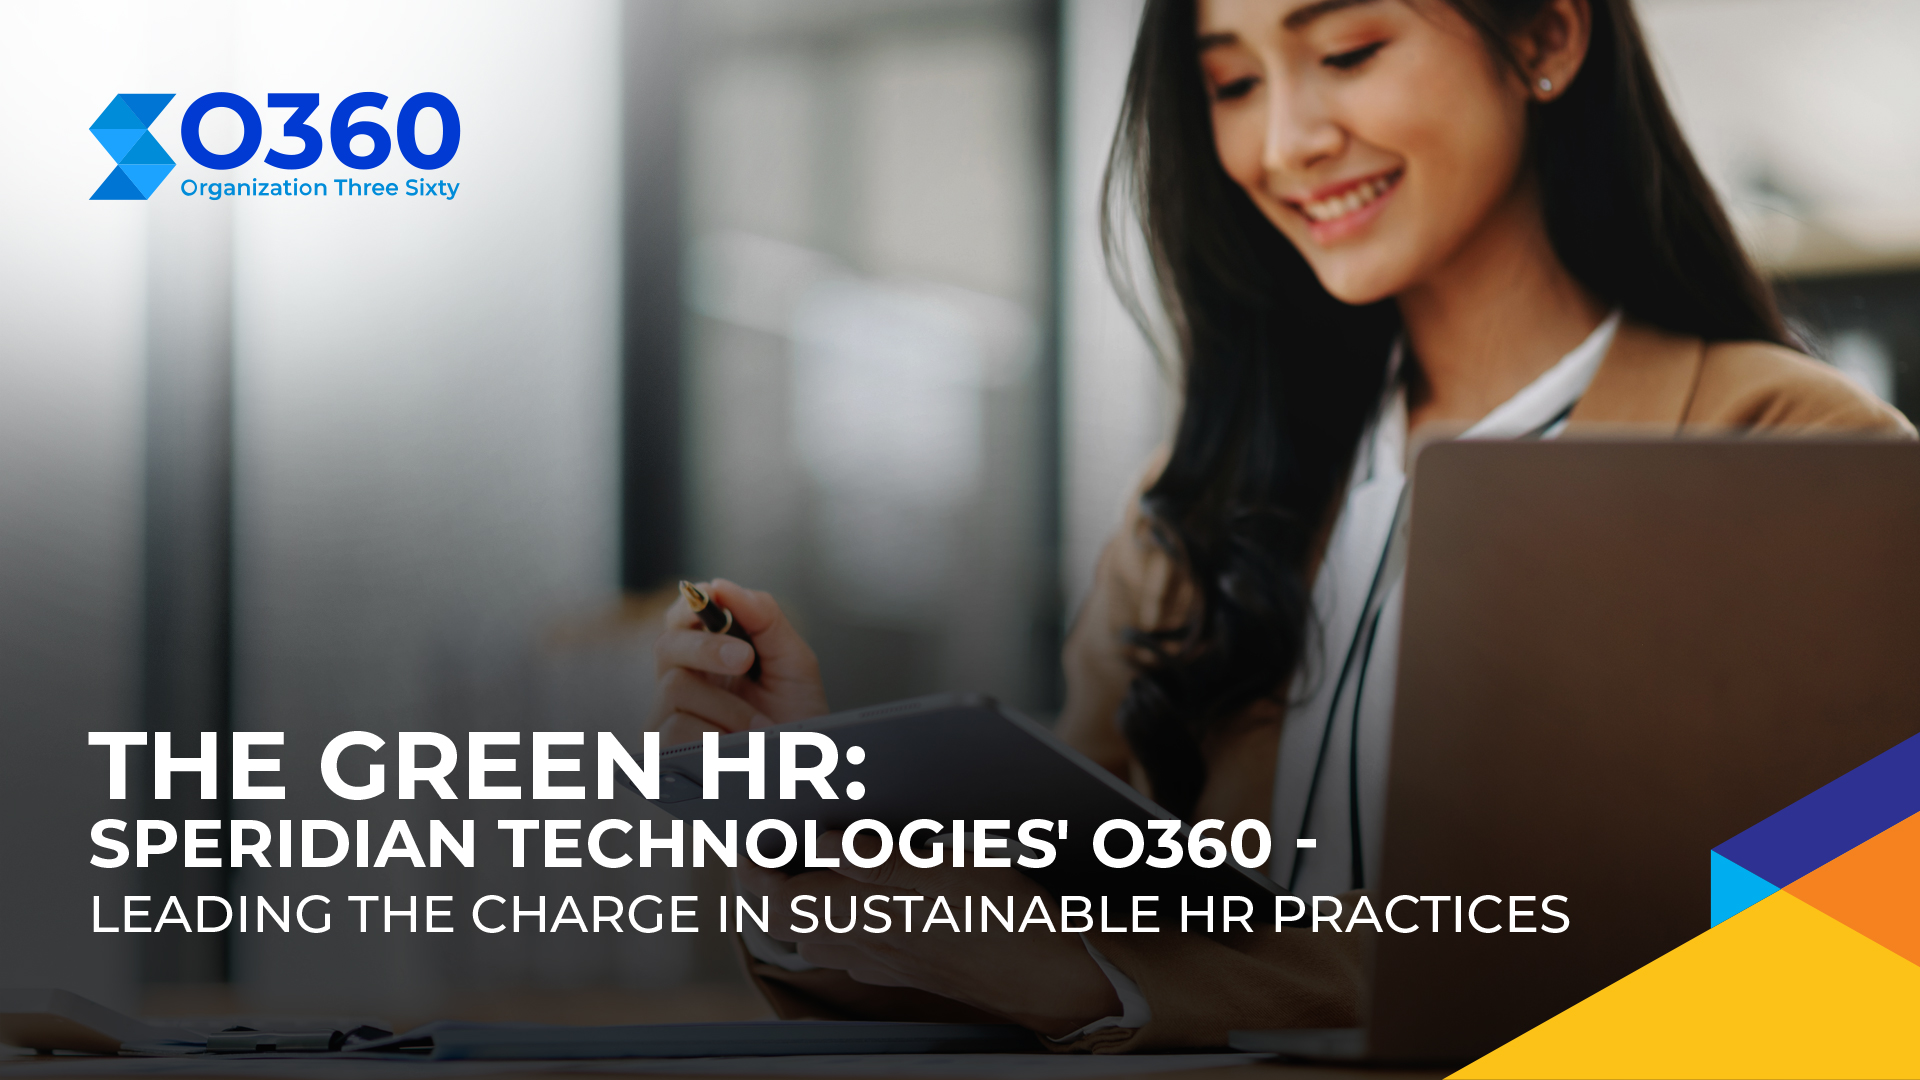 The Green HR: Speridian Technologies’ O360 – Leading the Charge in Sustainable HR Practices